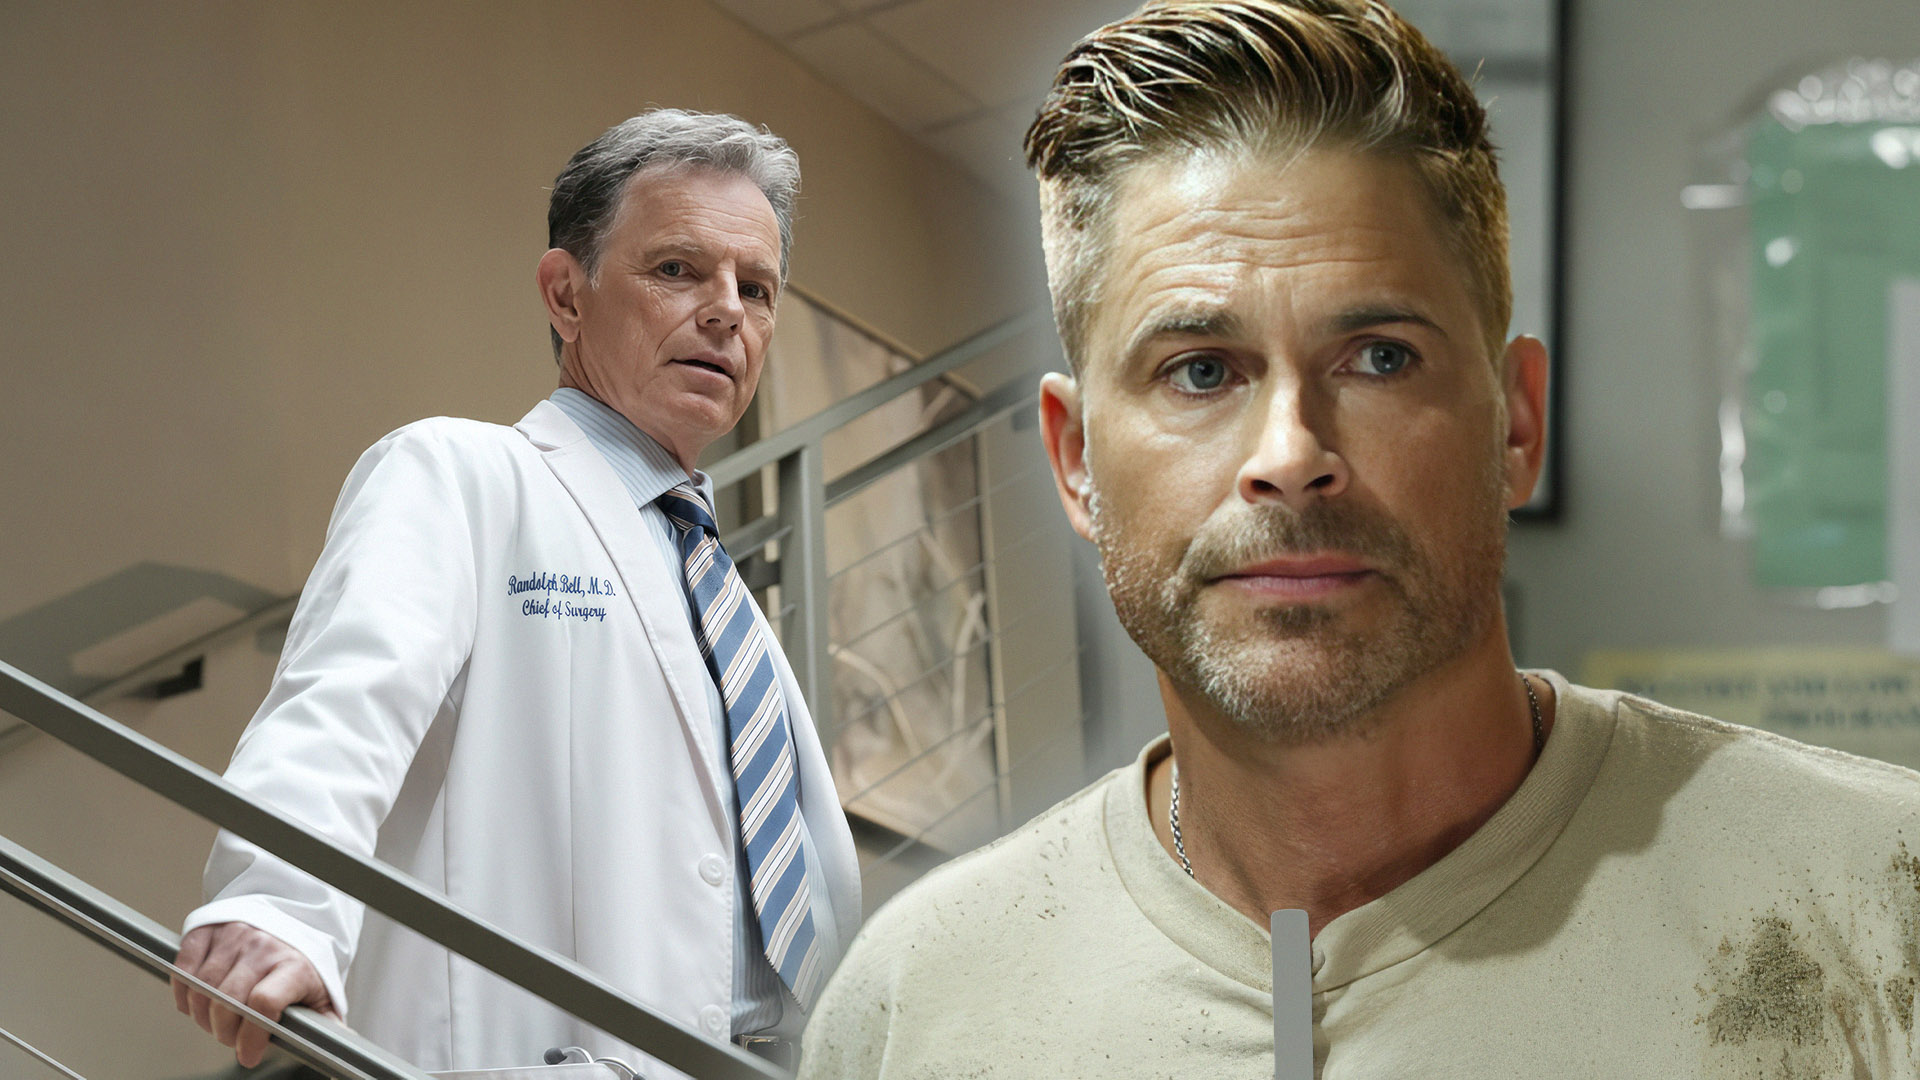 5 Best Medical Dramas of All Time to Get Addicted to